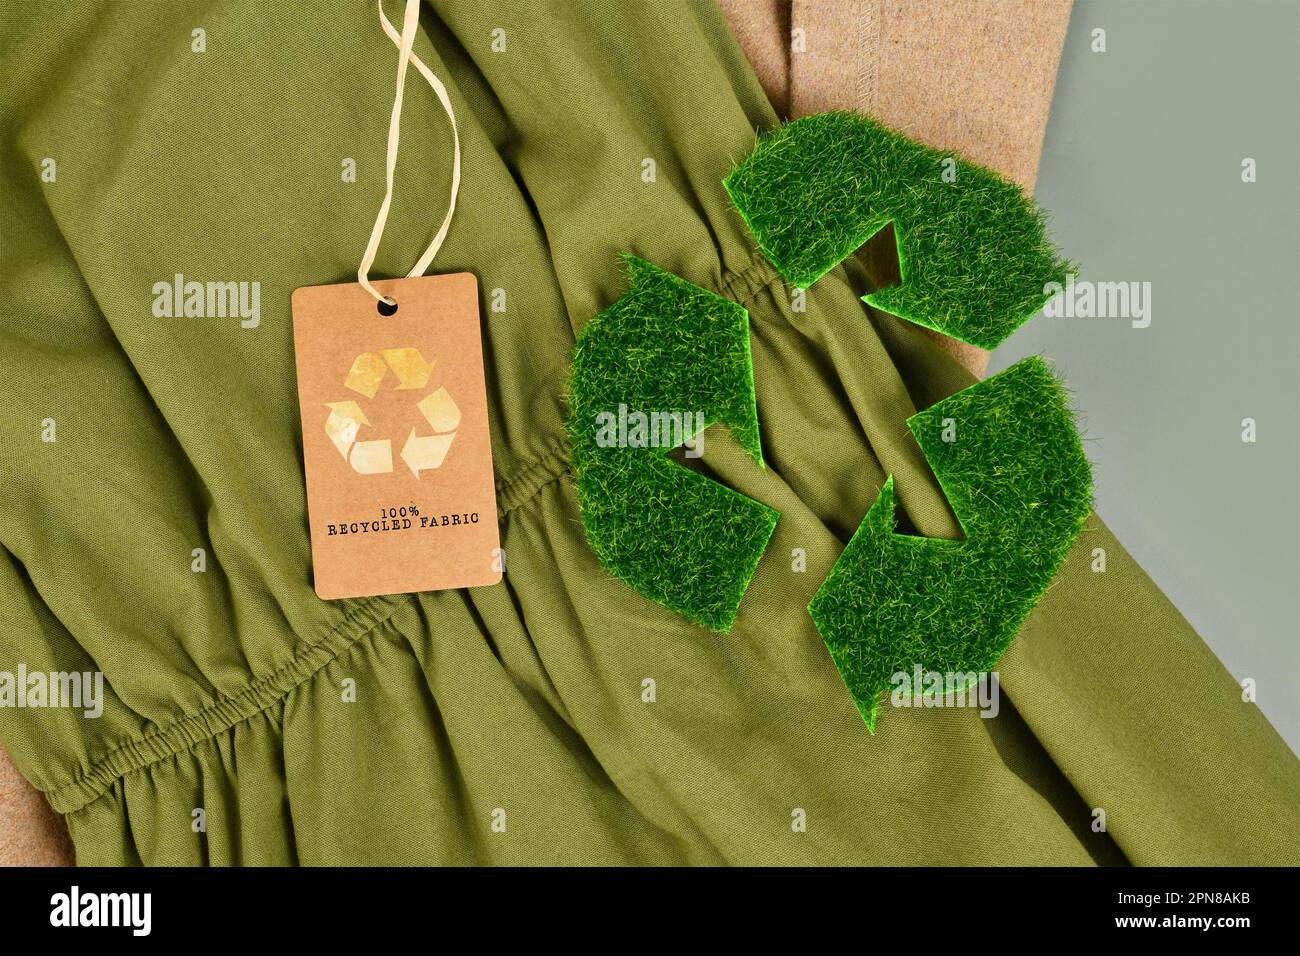 Green and beige eco friendly cotton fabric with 100 percent recycled label and recycling symbol made out of grass Stock Photo